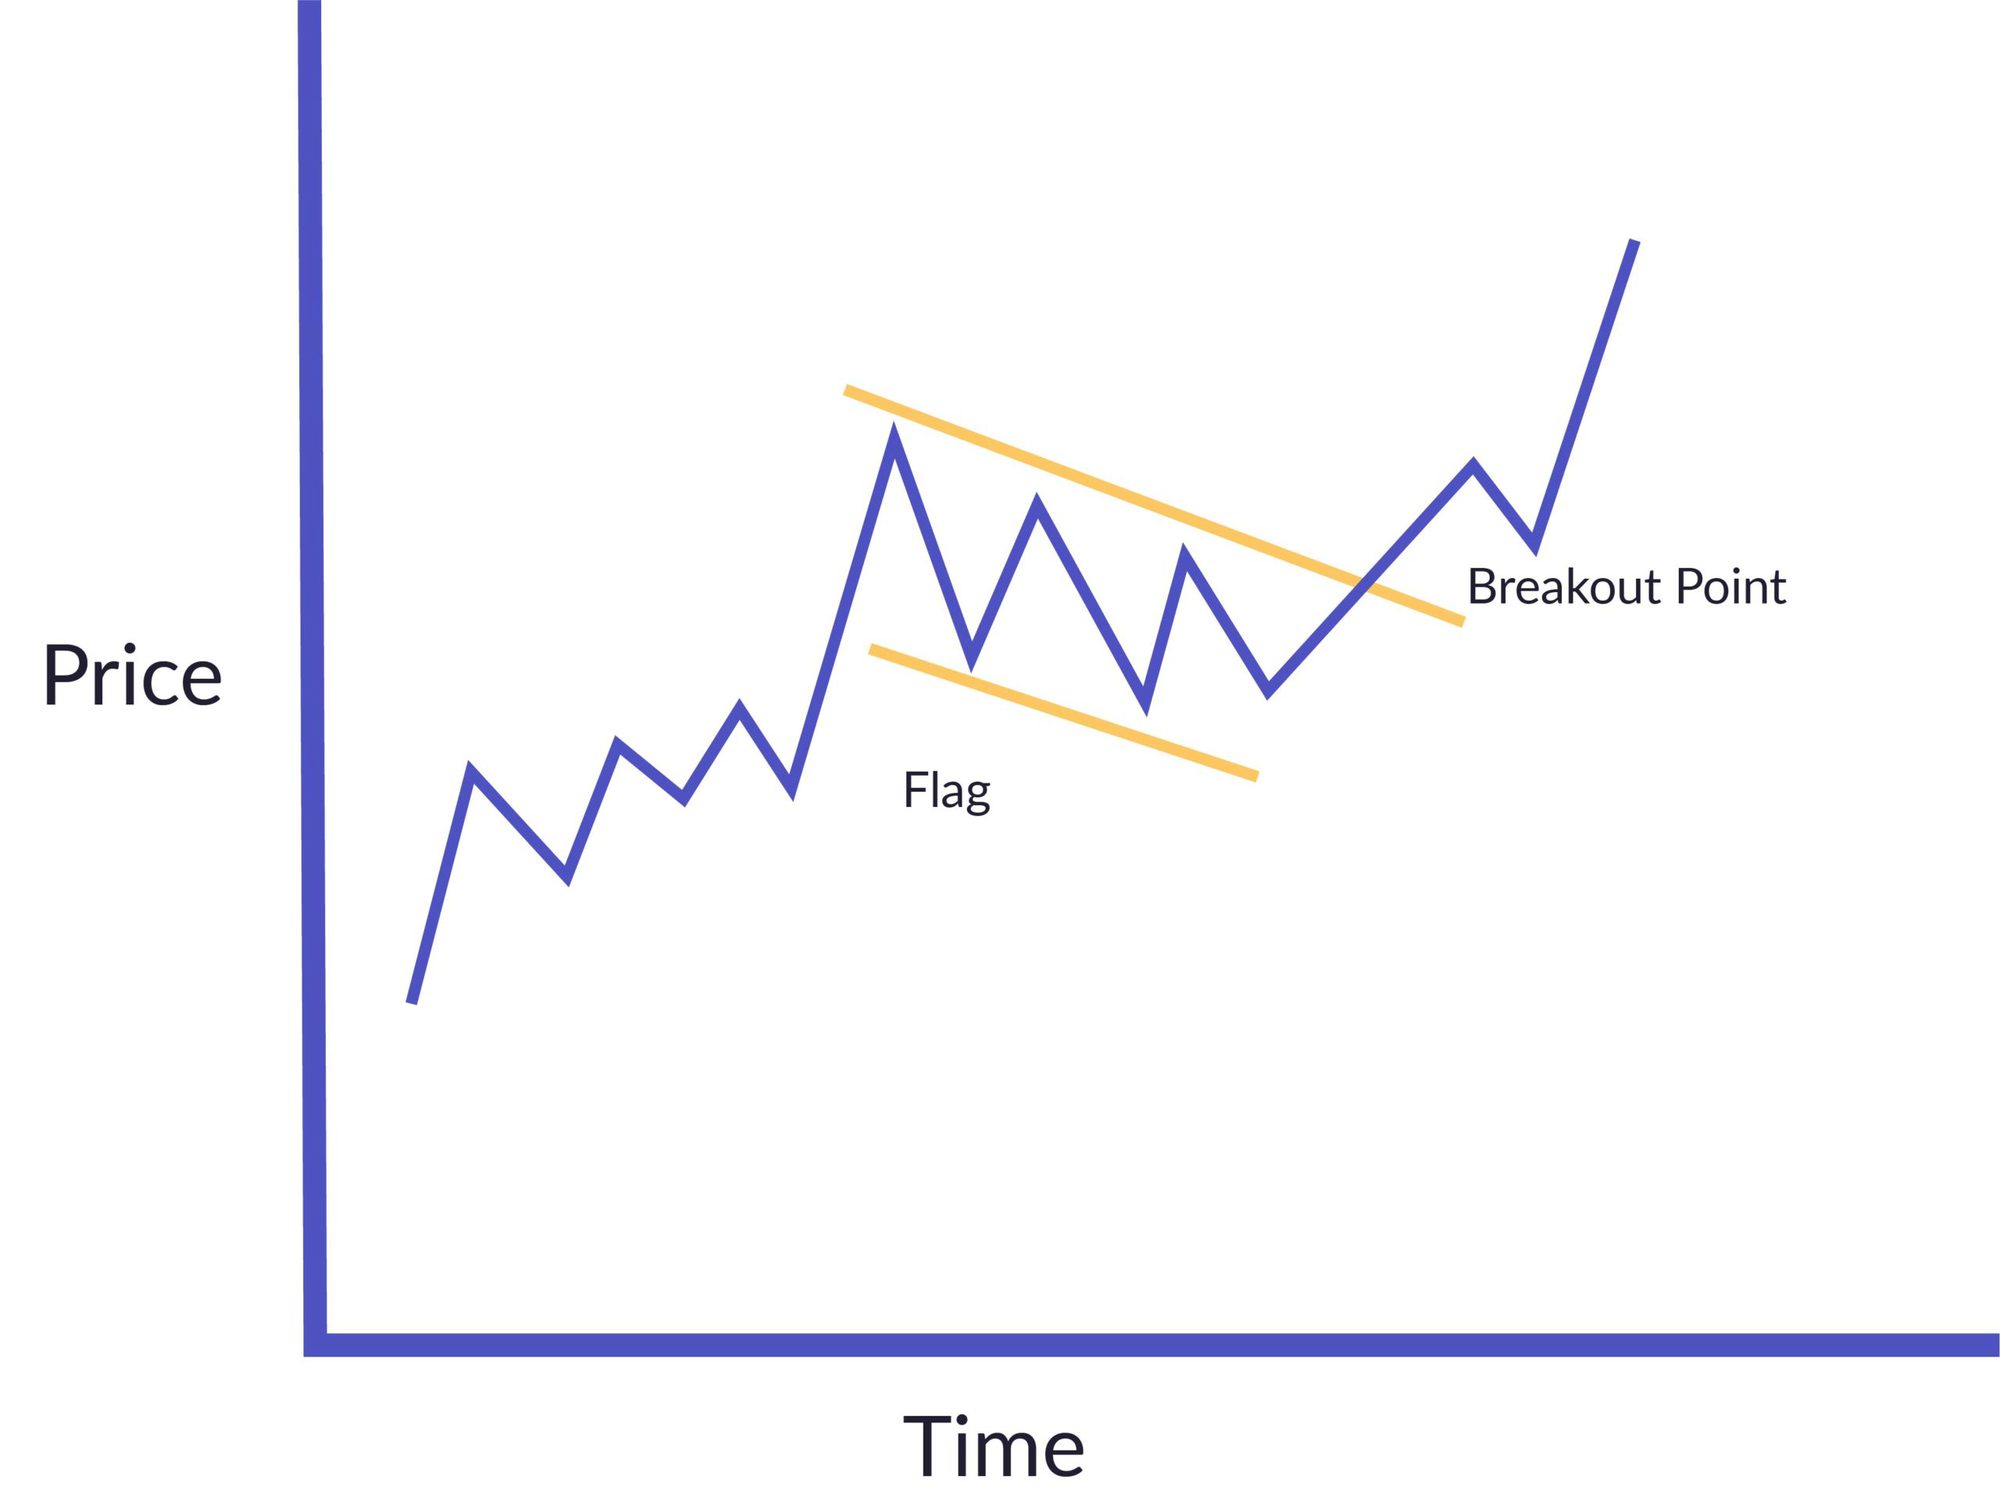 Example of a flag pattern trading chart